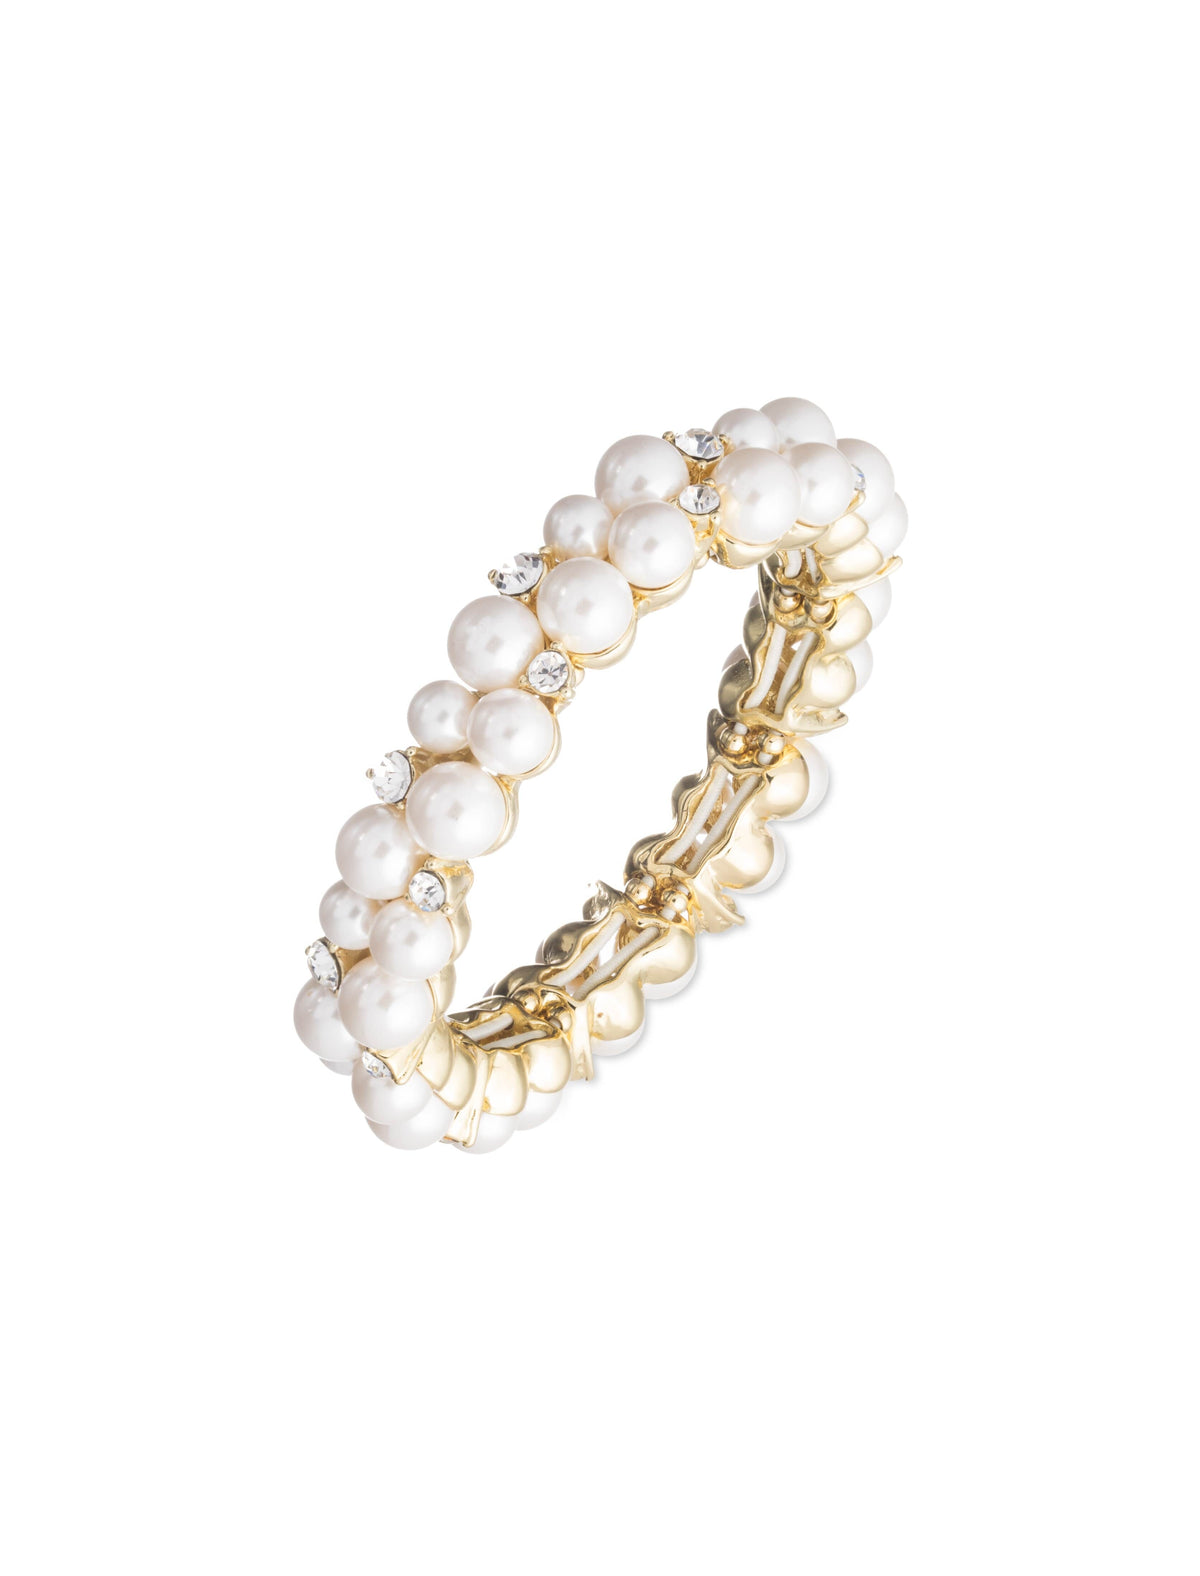 Clustered Faux Pearl and Crystal Stretch Bracelet